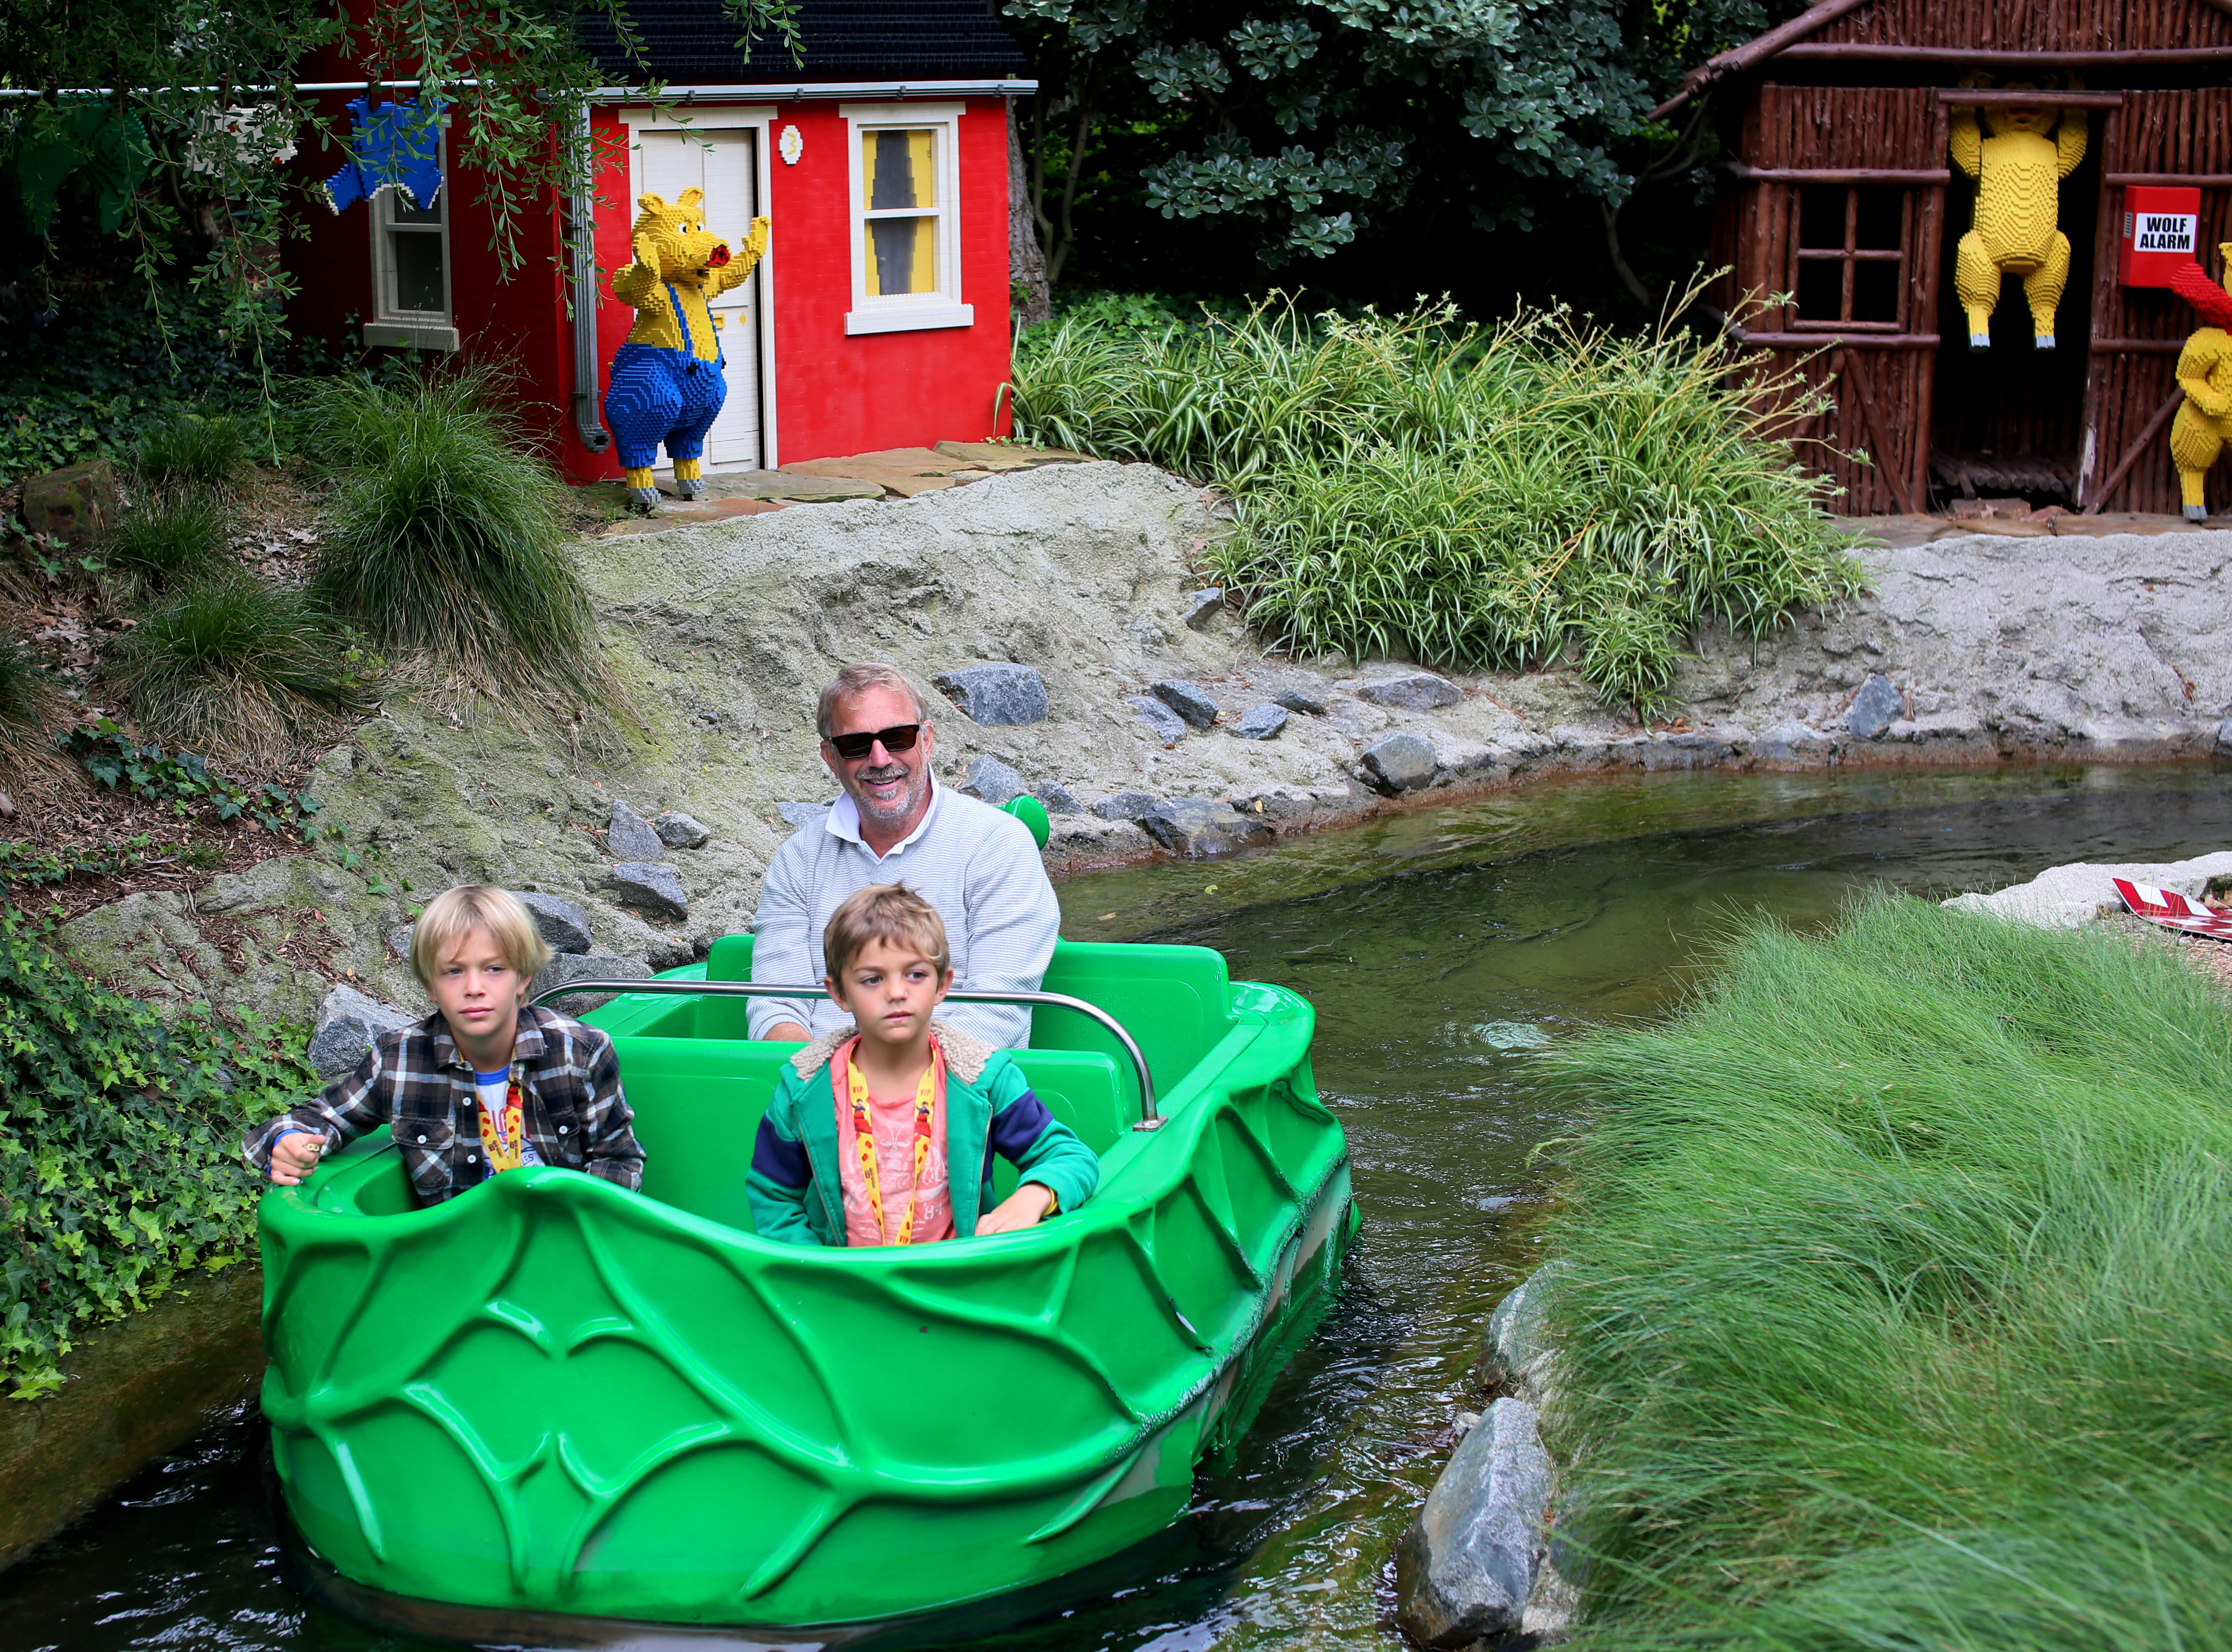 Kevin Costner at Legoland California with his sons in 2015 | Source: Getty Images